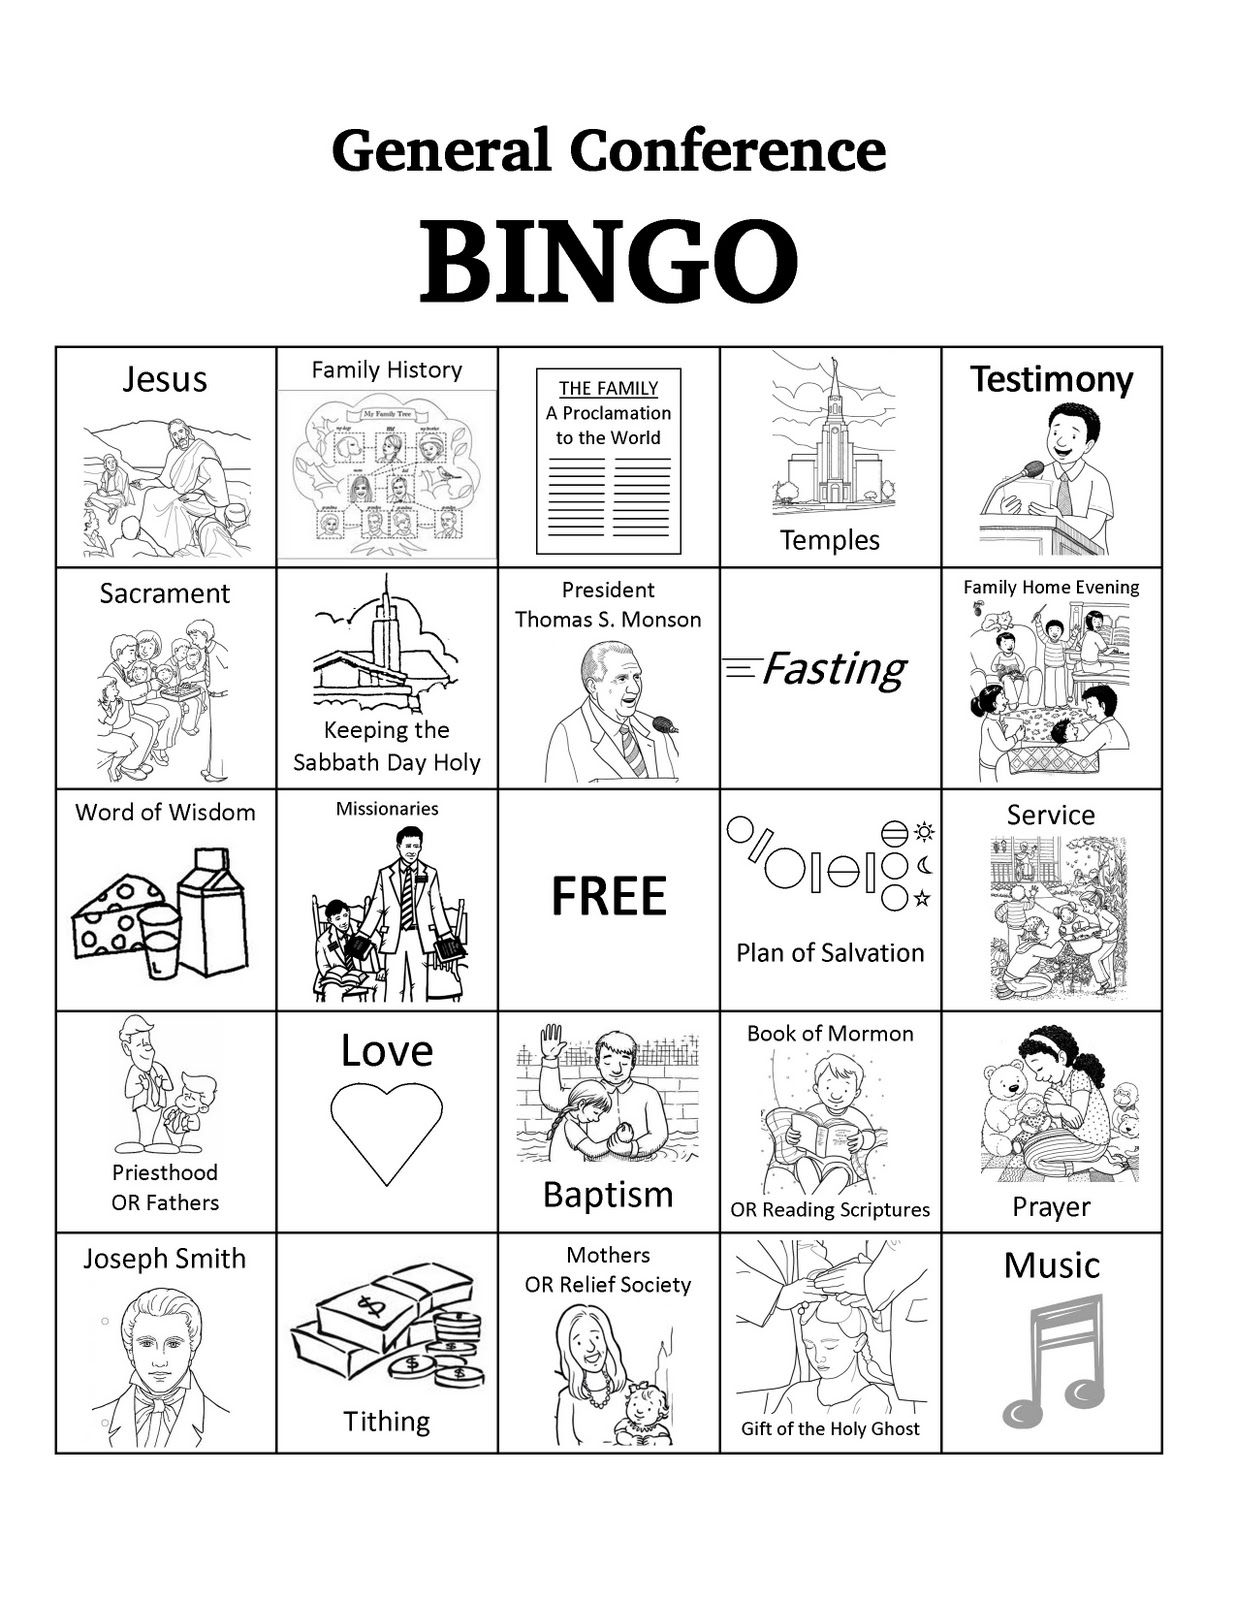 Free Download General Conference BINGO Bits Of 